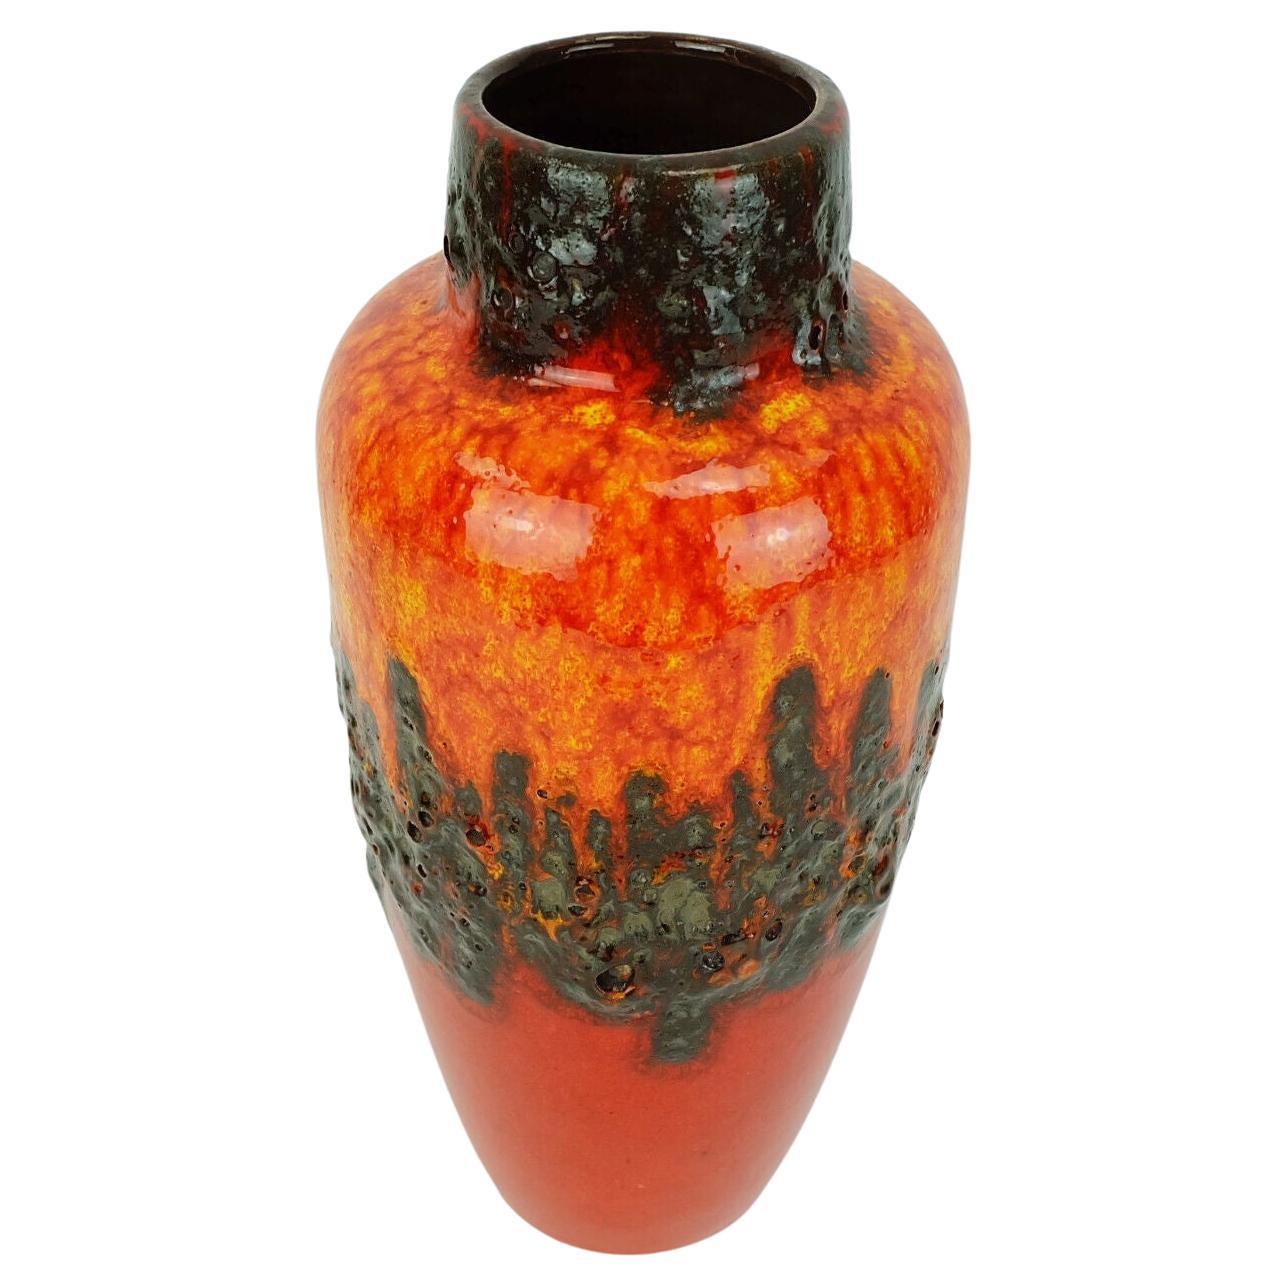 1960s 70s West German vase manufactured by Scheurich Keramik. Model number 517-30 with intense red, orange and yellow glaze combined with black fat lava glaze in zigzag pattern. 

Dimensions in cm:
Height 31 cm, width 14 cm.

Dimensions in